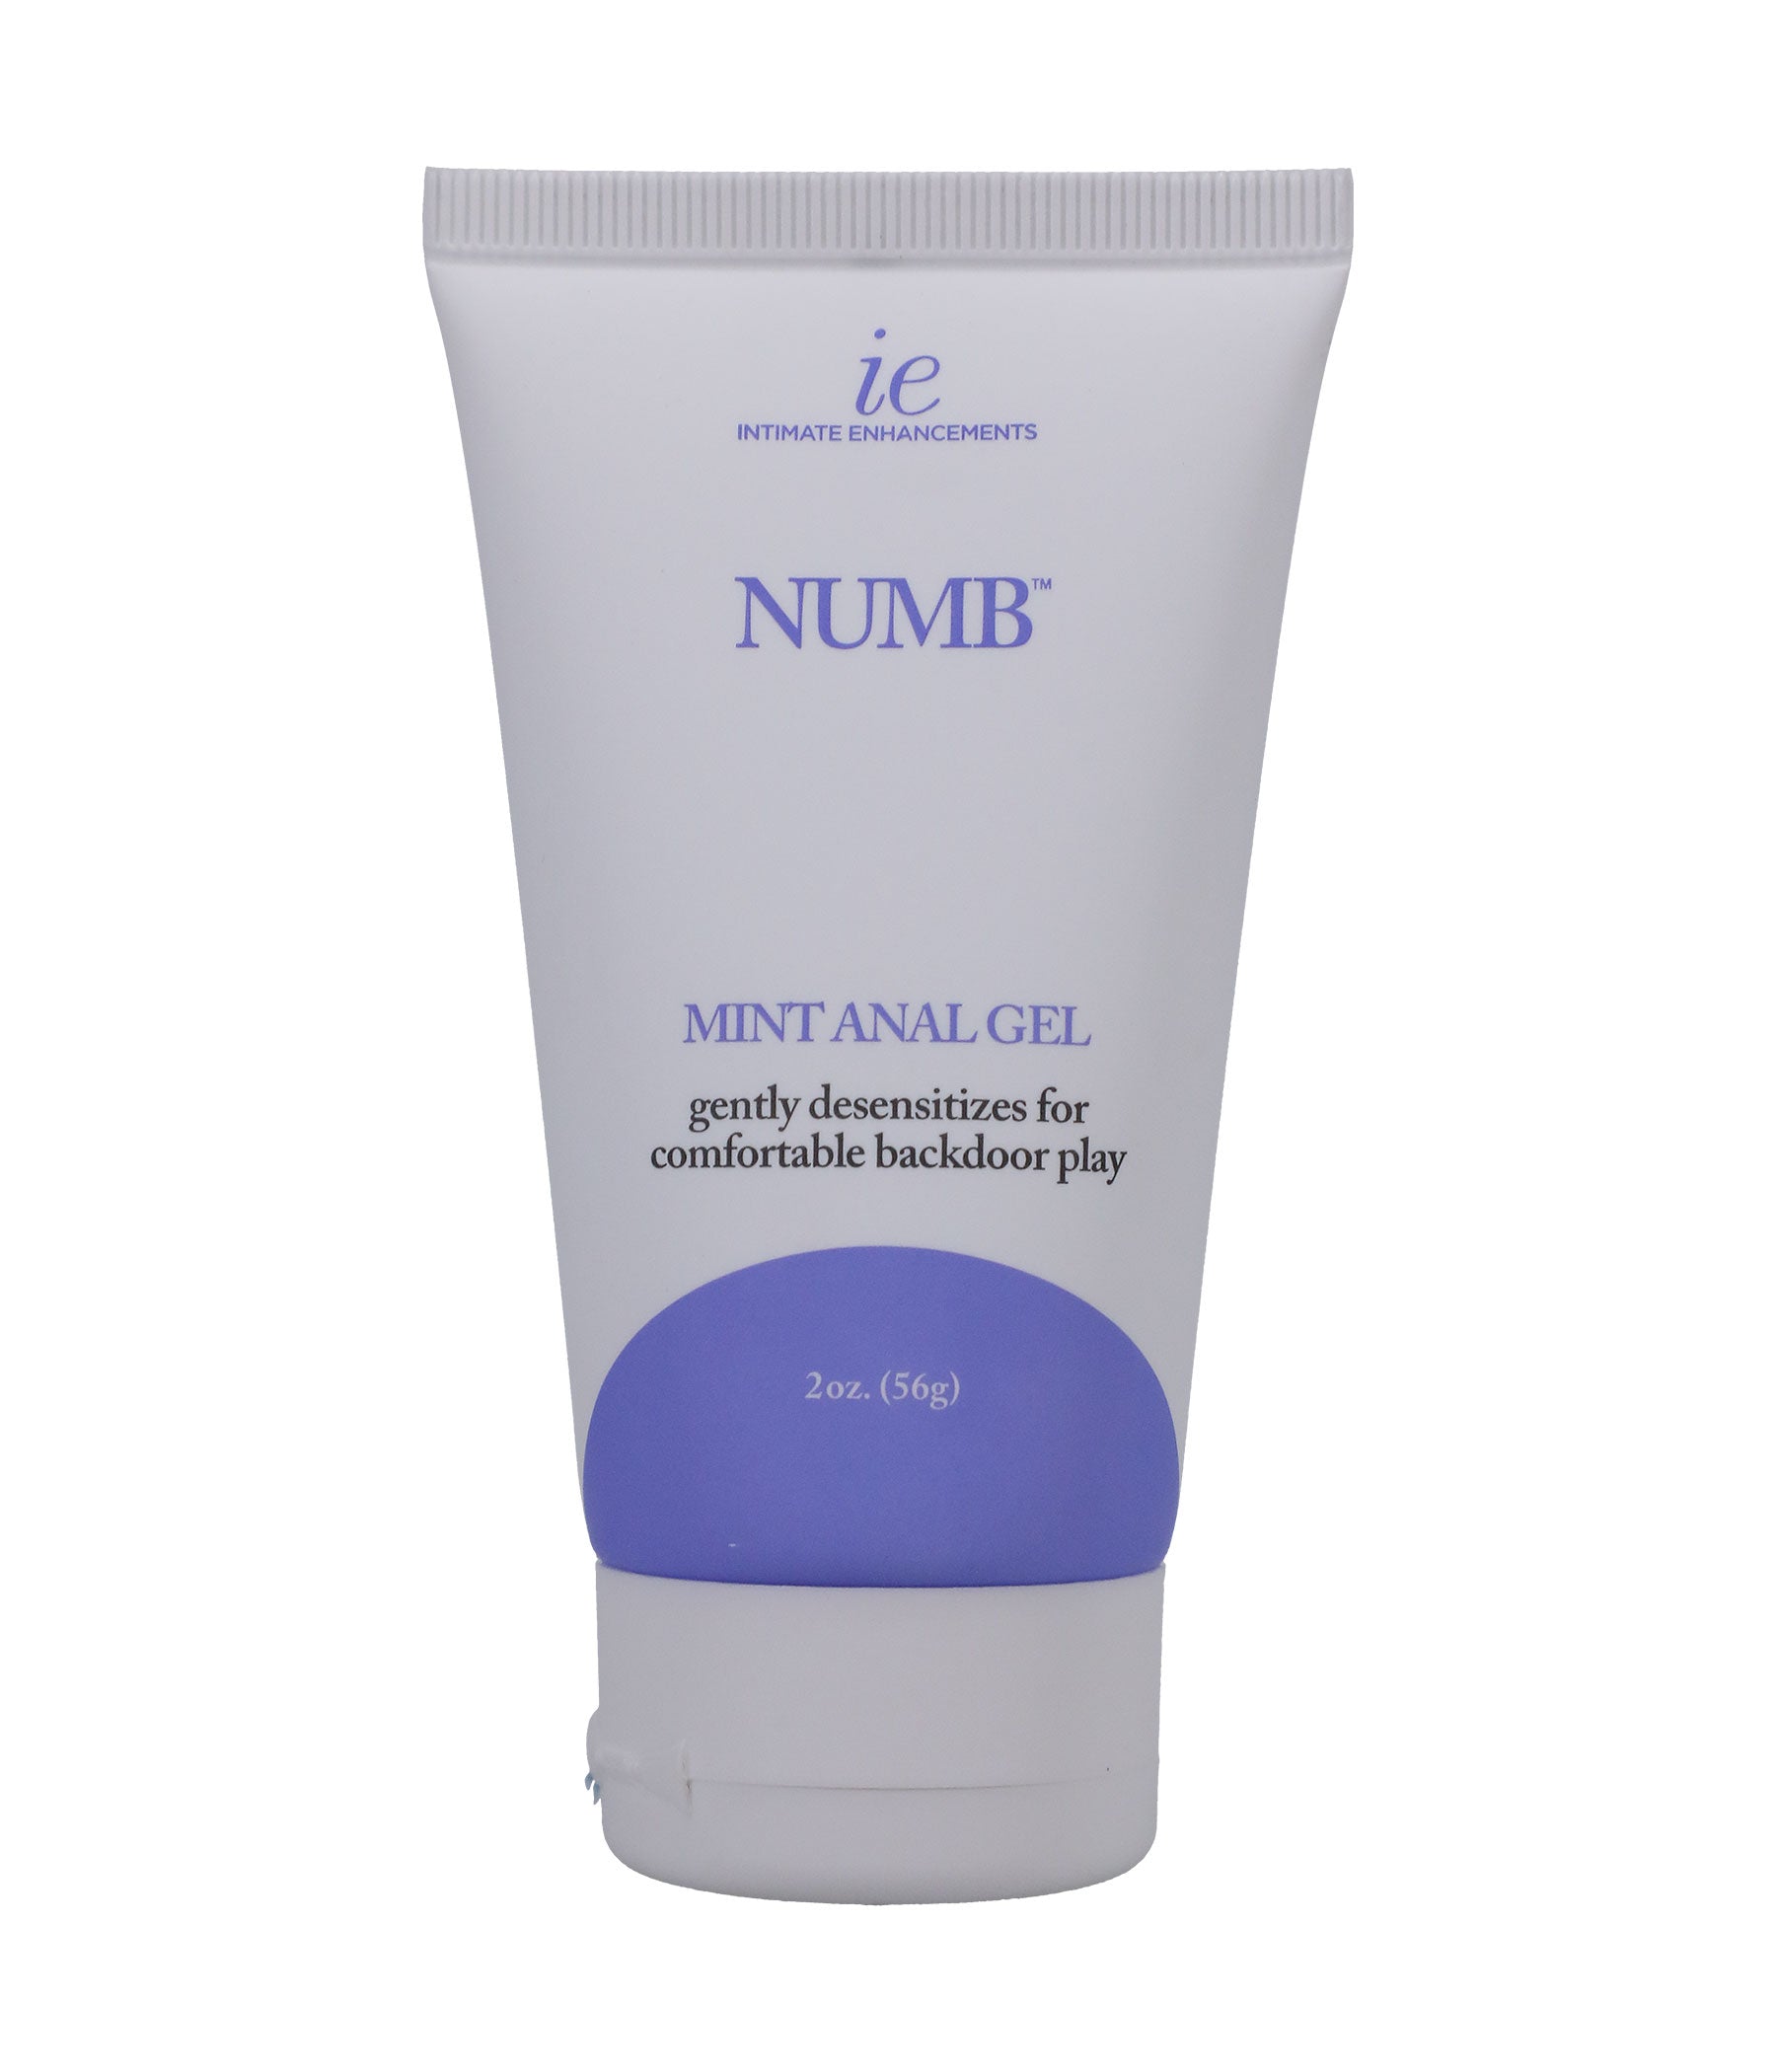 Intimate Enhancements Numb - Mint Anal Gel - 2 Oz. - Boxed-0